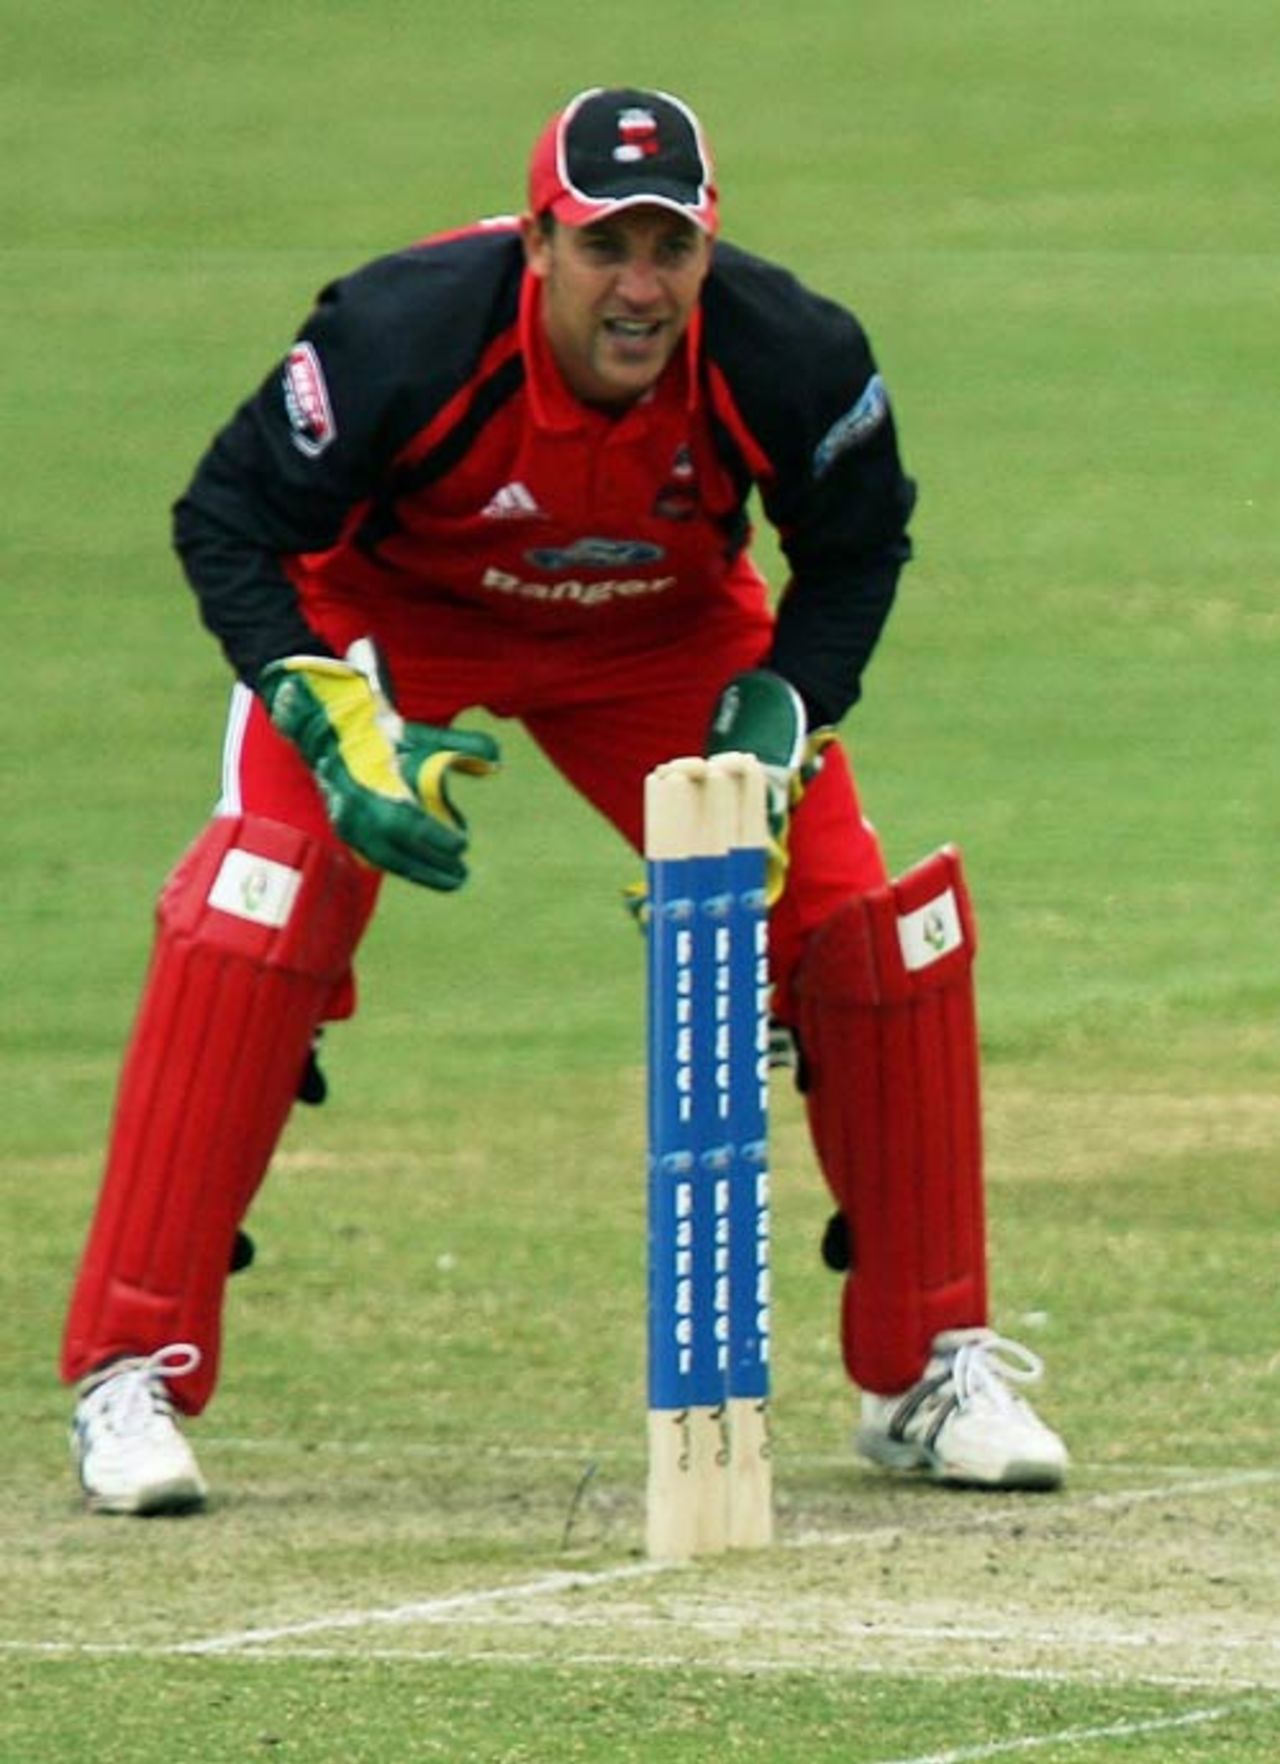 Graham Manou waits for a return from the outfield, South Australia v New South Wales, FR Cup, Adelaide, November 7, 2007